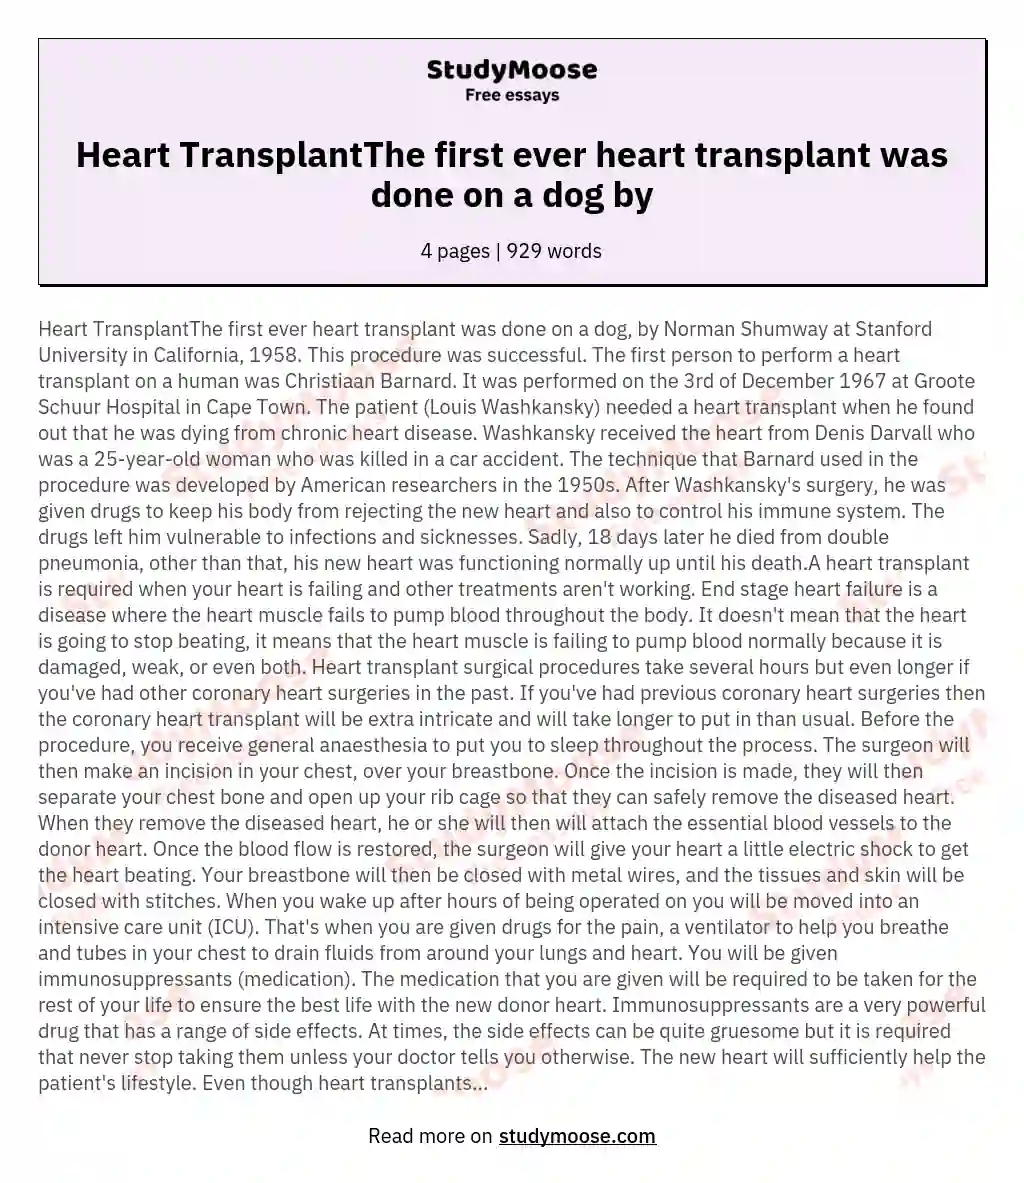 Heart TransplantThe first ever heart transplant was done on a dog by